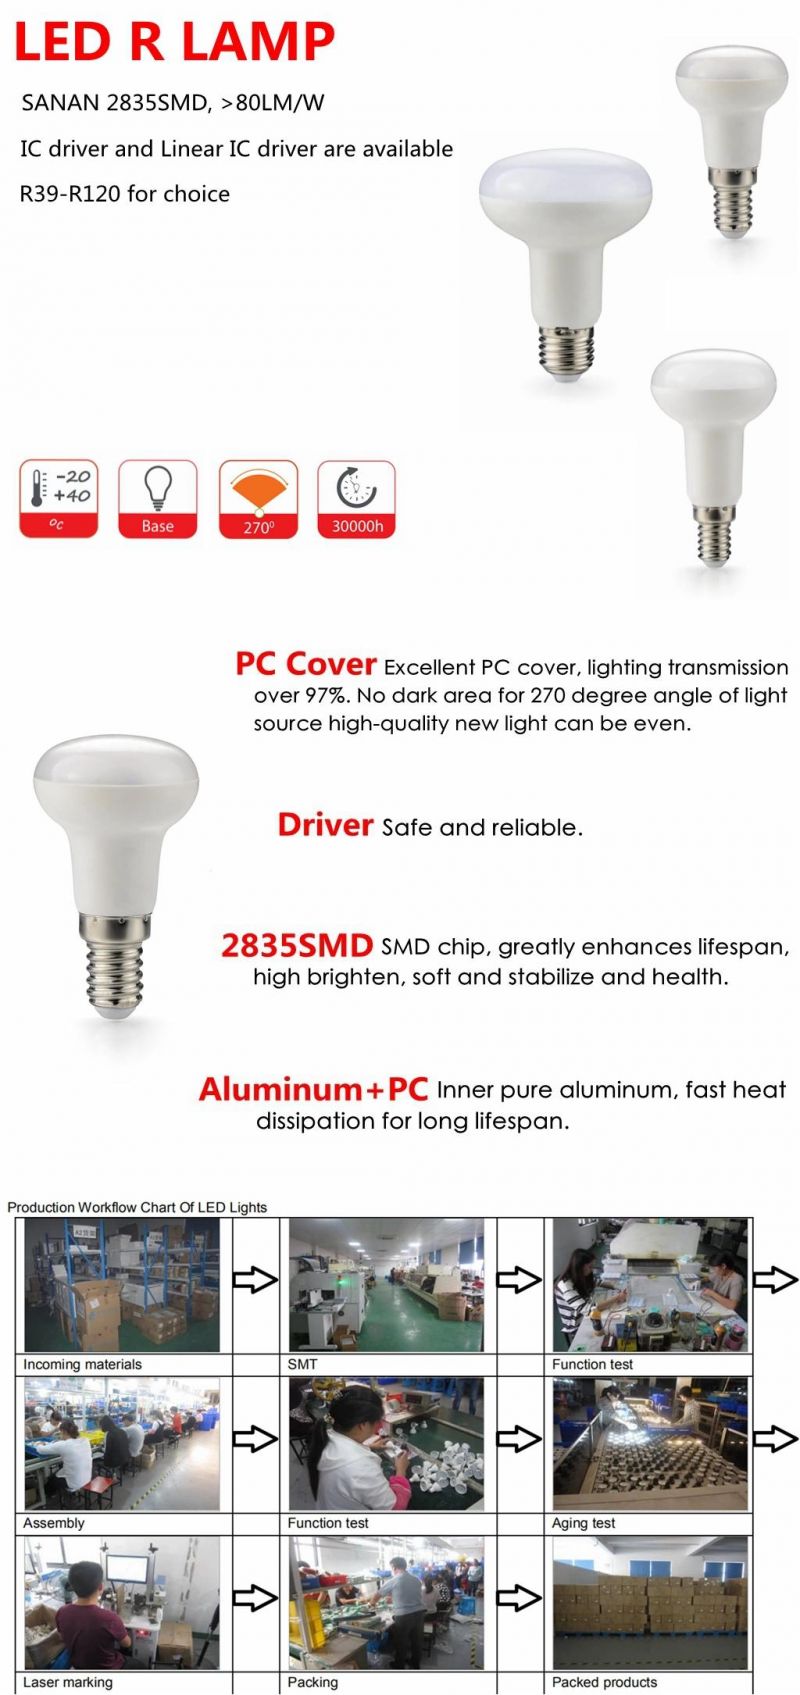 LED Lamp Bulb CE RoHS ERP Approved R50 5W E14 Plastic Aluminum Recessed LED Bulb Light for Indoor Lighting and Home Decoration